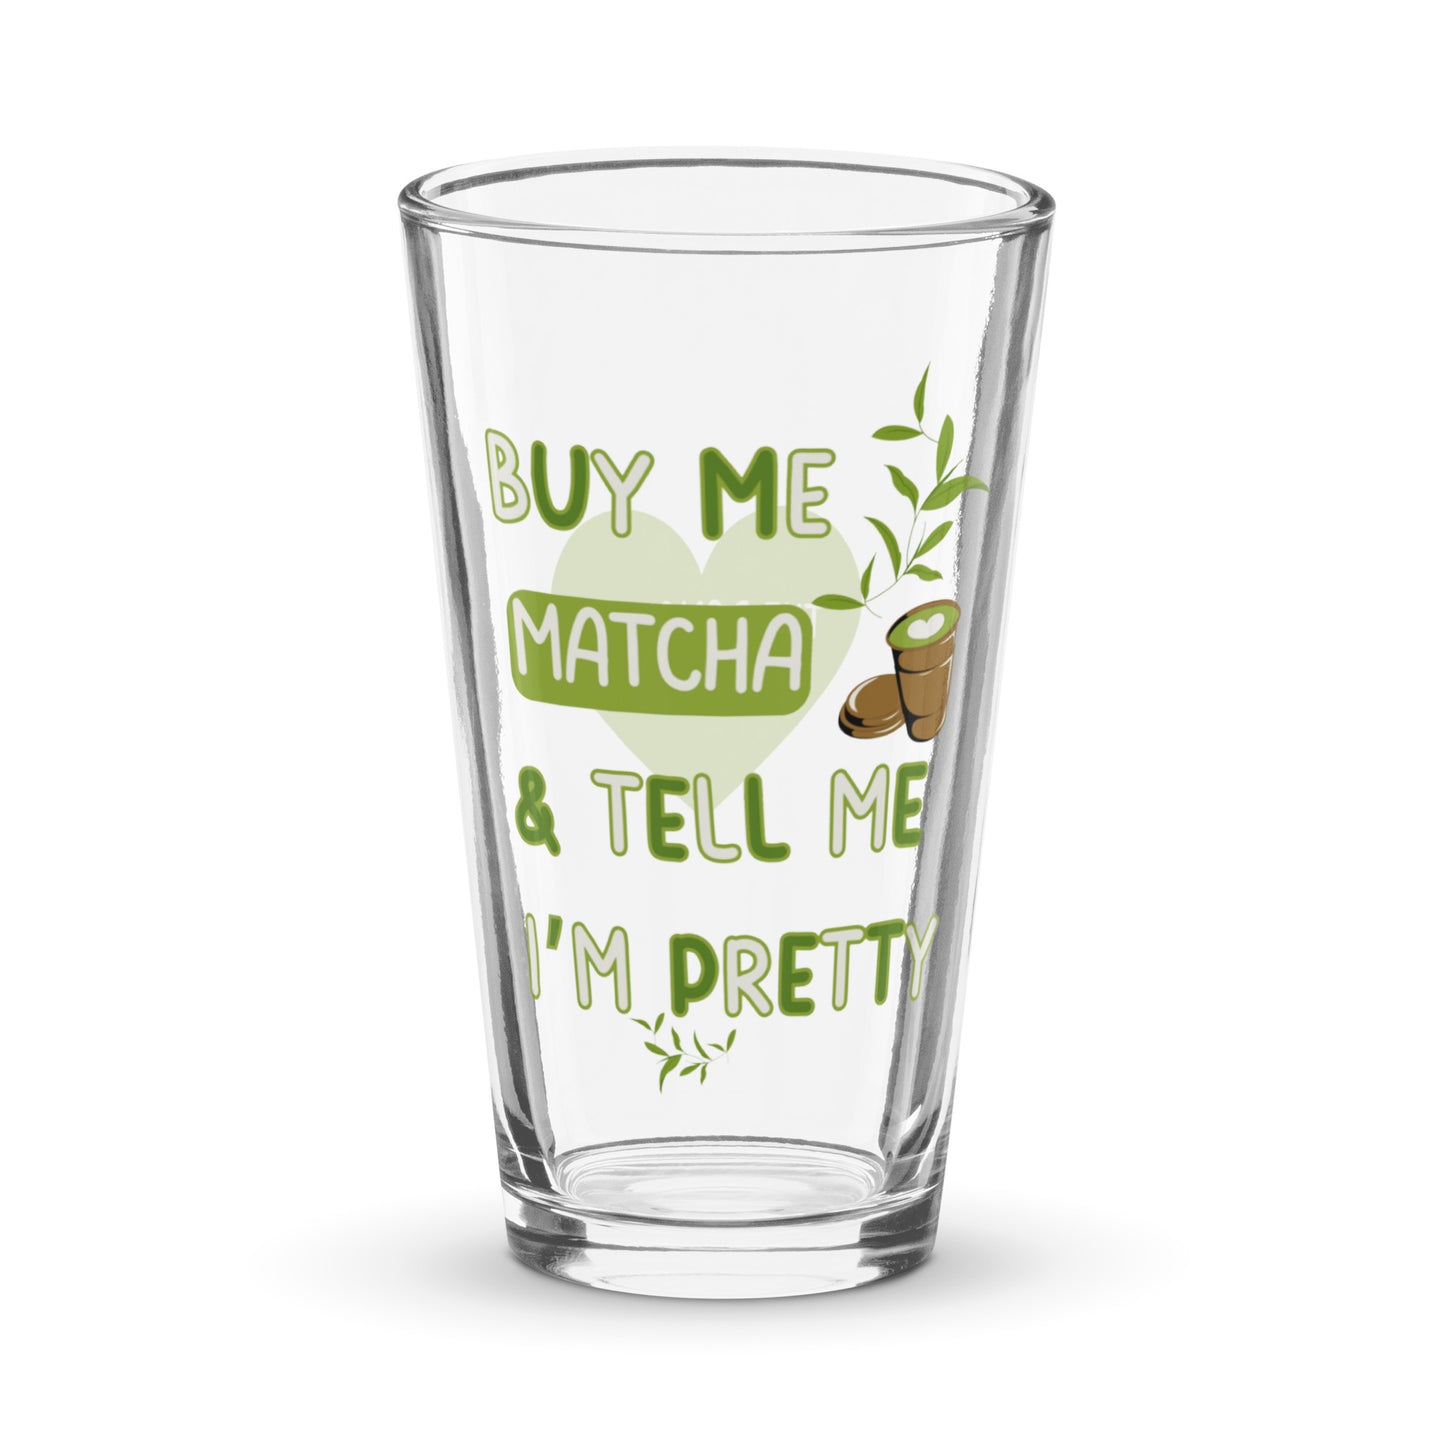 Buy Me Matcha and Tell Me I'm Pretty - Pint Glass,  by The Banannie Diaries - Volume: 16 oz. (473 ml), Glassware, Houseware